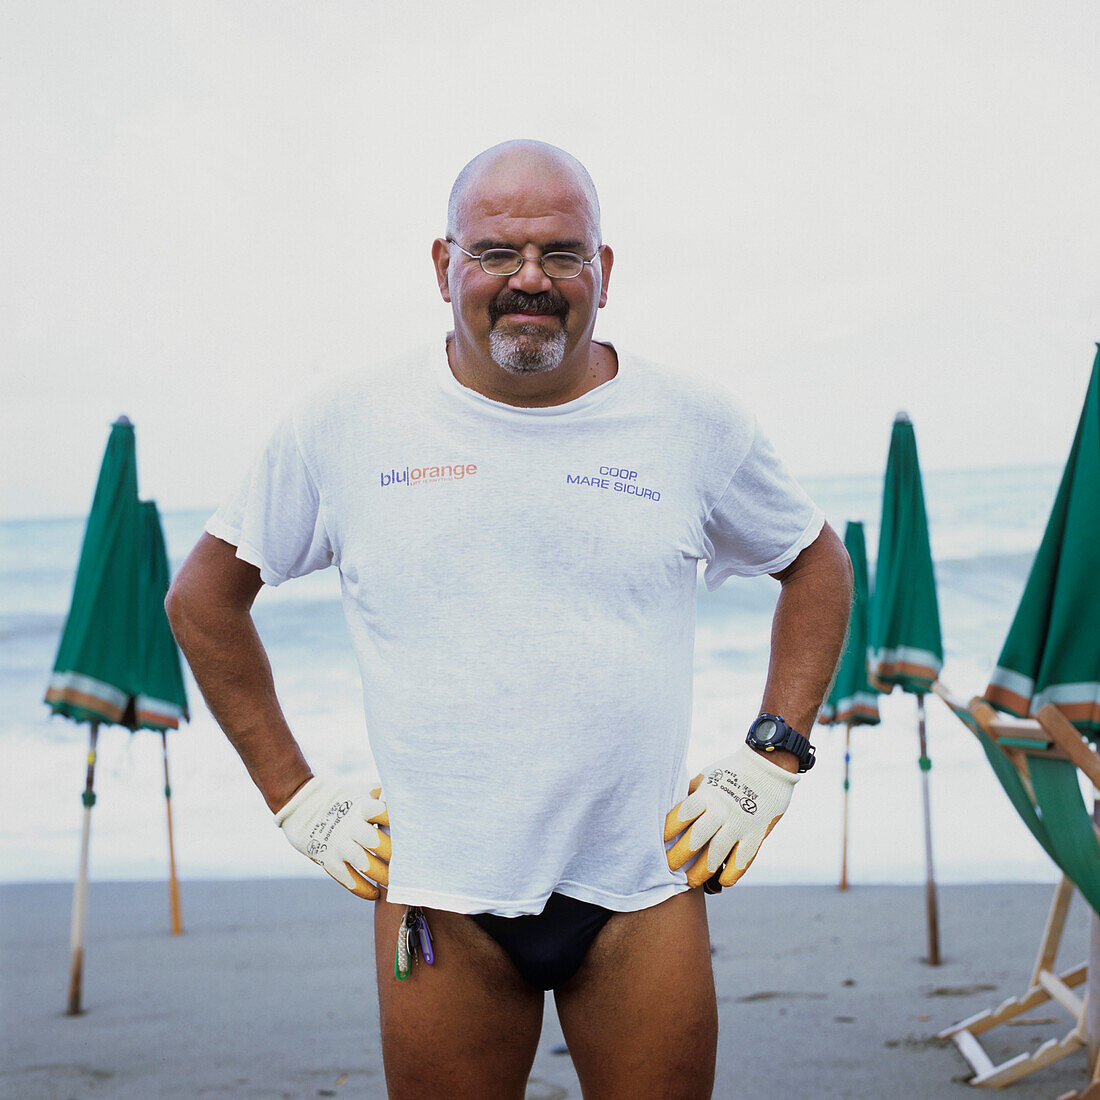 bath attendant in Levanto, Ligurien, Italy, wearing gloves, security, working, to position deckchais, to put away deckchairs, putting his hands in his hips, smiling in Camera, friendly, looking for, closing time, end of work, after work, finish, glasses, 